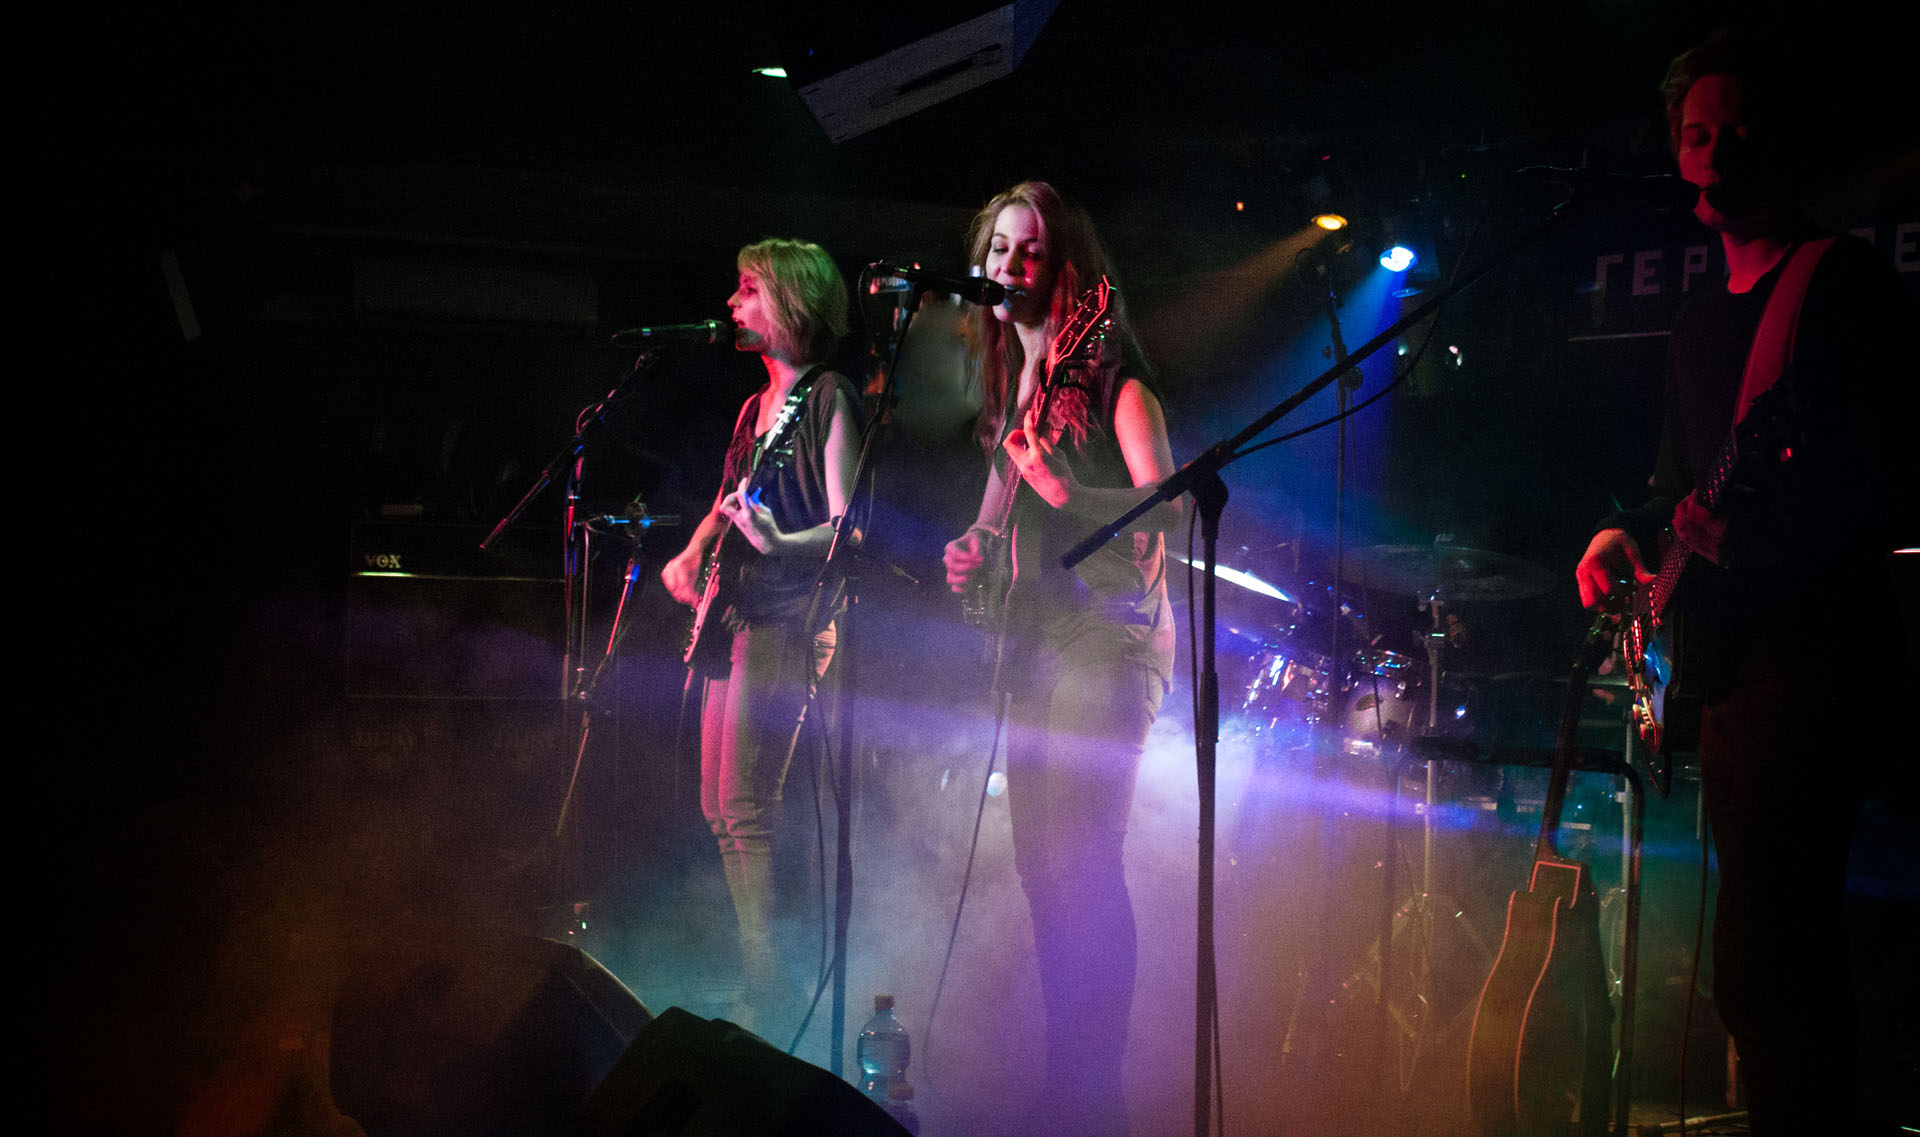 MonaLisa Twins with full band on stage at Replugged, Vienna, 2012